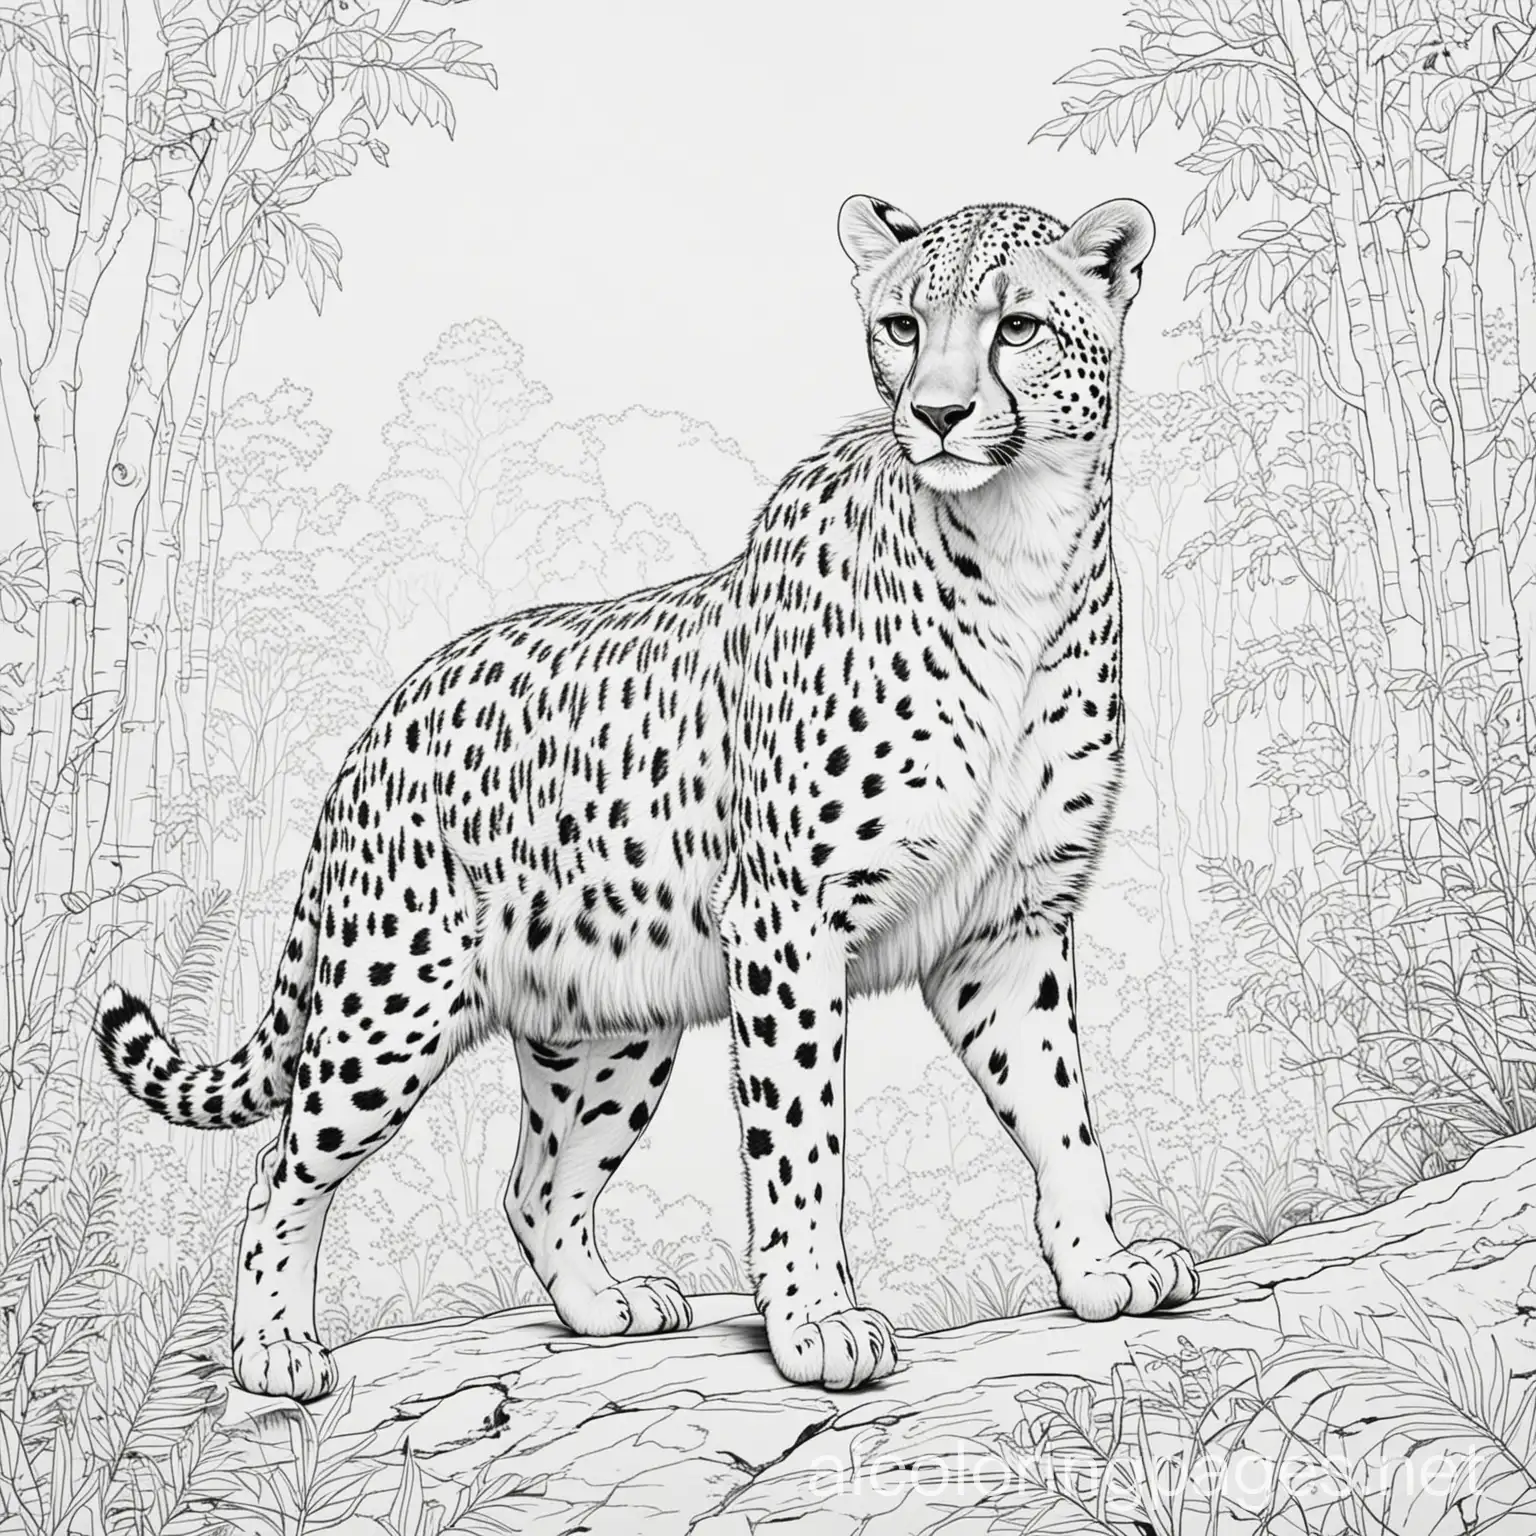 colouring book forest cheetah with action moment, Coloring Page, black and white, line art, white background, Simplicity, Ample White Space. The background of the coloring page is plain white to make it easy for young children to color within the lines. The outlines of all the subjects are easy to distinguish, making it simple for kids to color without too much difficulty, Coloring Page, black and white, line art, white background, Simplicity, Ample White Space. The background of the coloring page is plain white to make it easy for young children to color within the lines. The outlines of all the subjects are easy to distinguish, making it simple for kids to color without too much difficulty